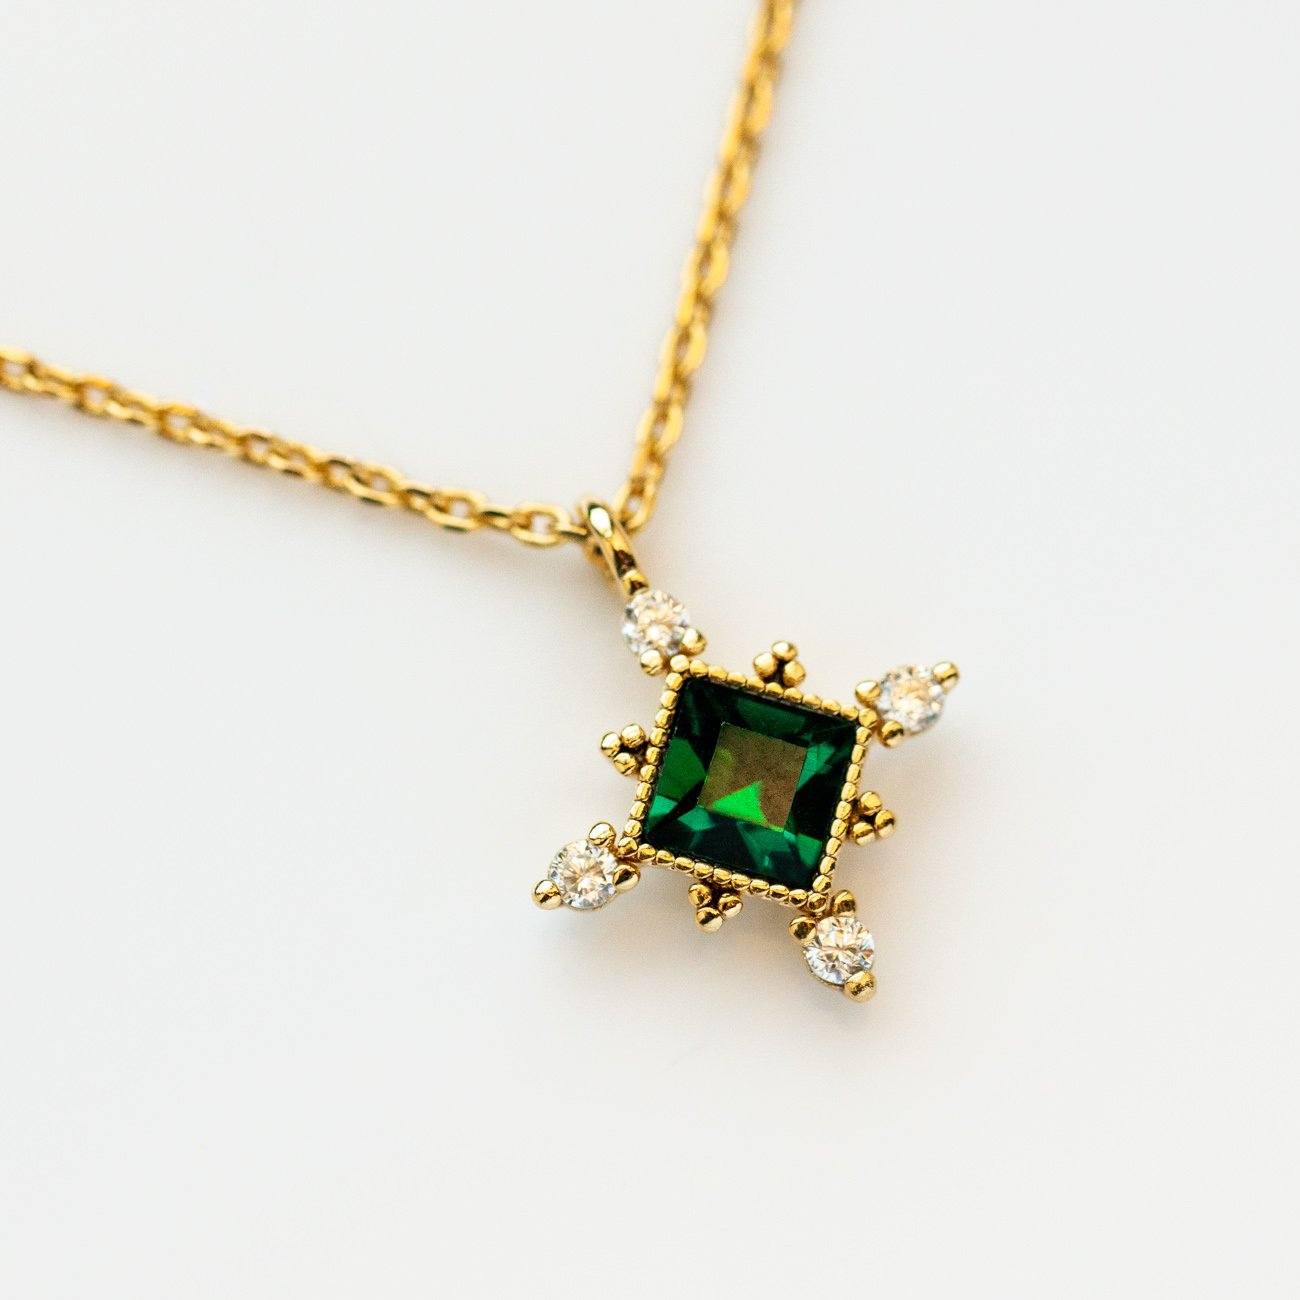 The Emerald Sierra Necklace from Lover's Tempo is vintage inspired and featured Emerald Swarovski crystal with a yellow gold chain.